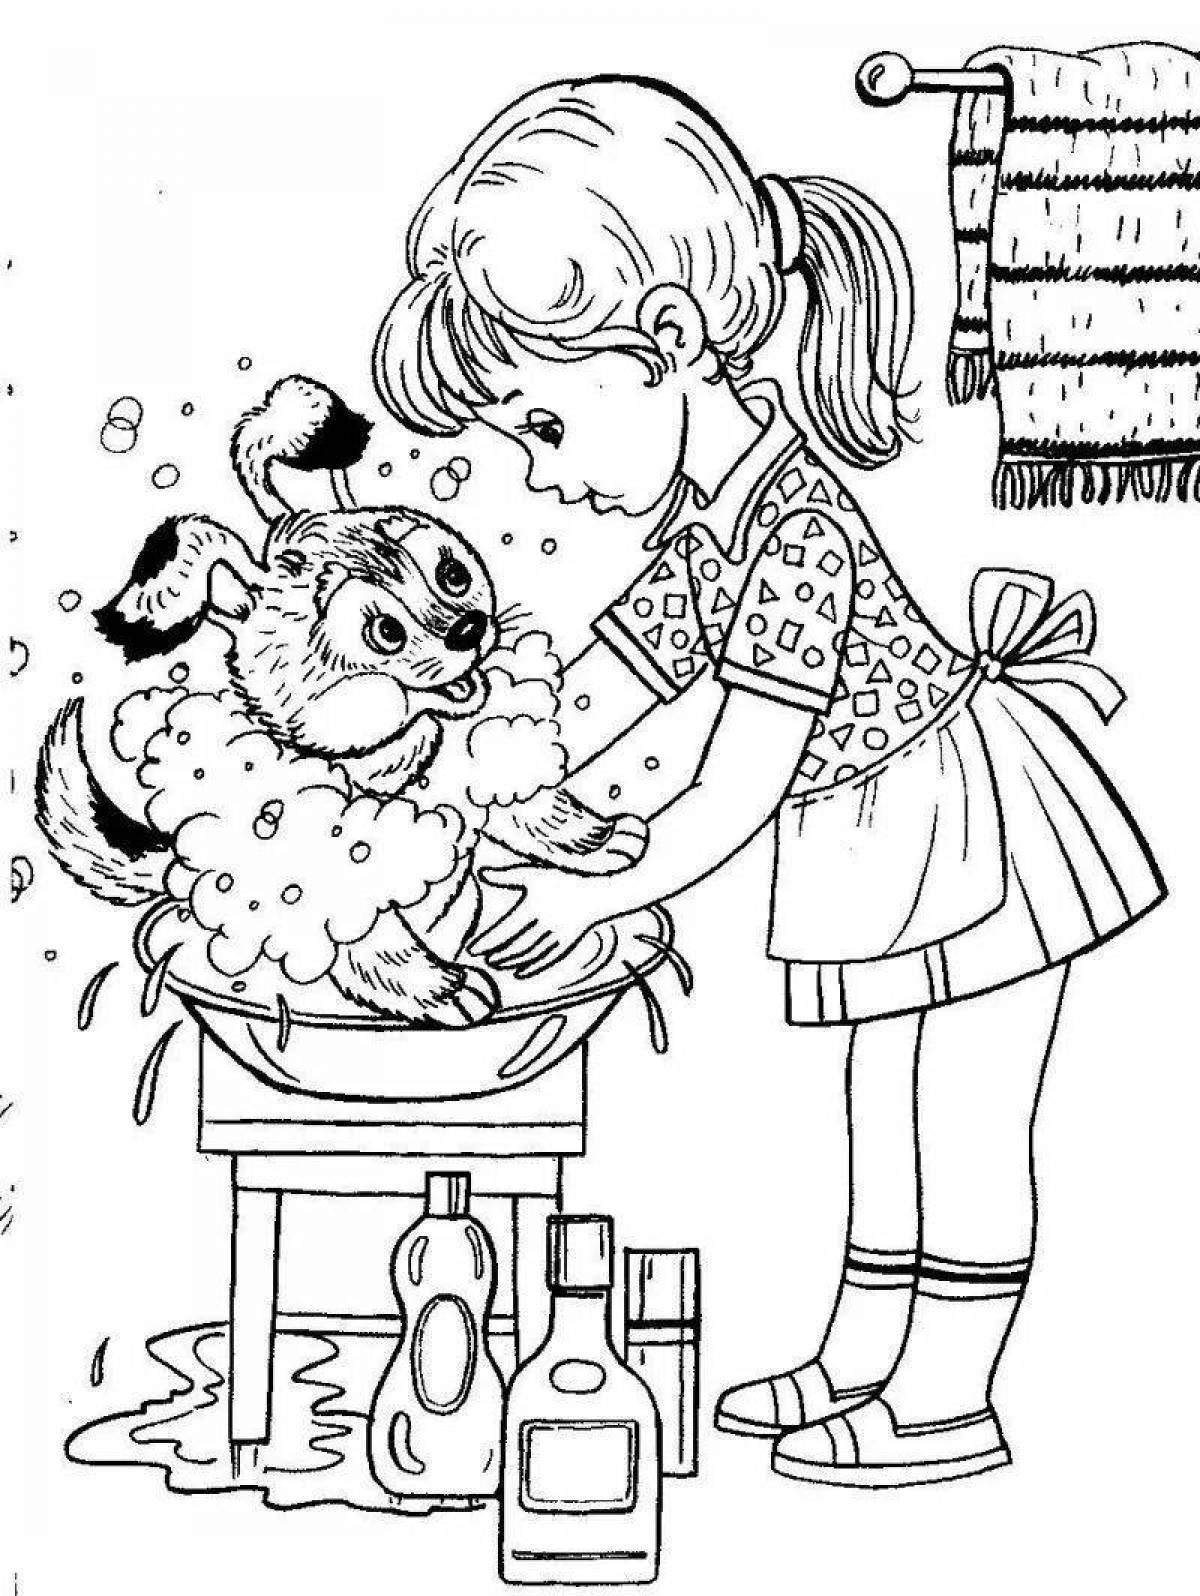 Charity good deeds coloring page